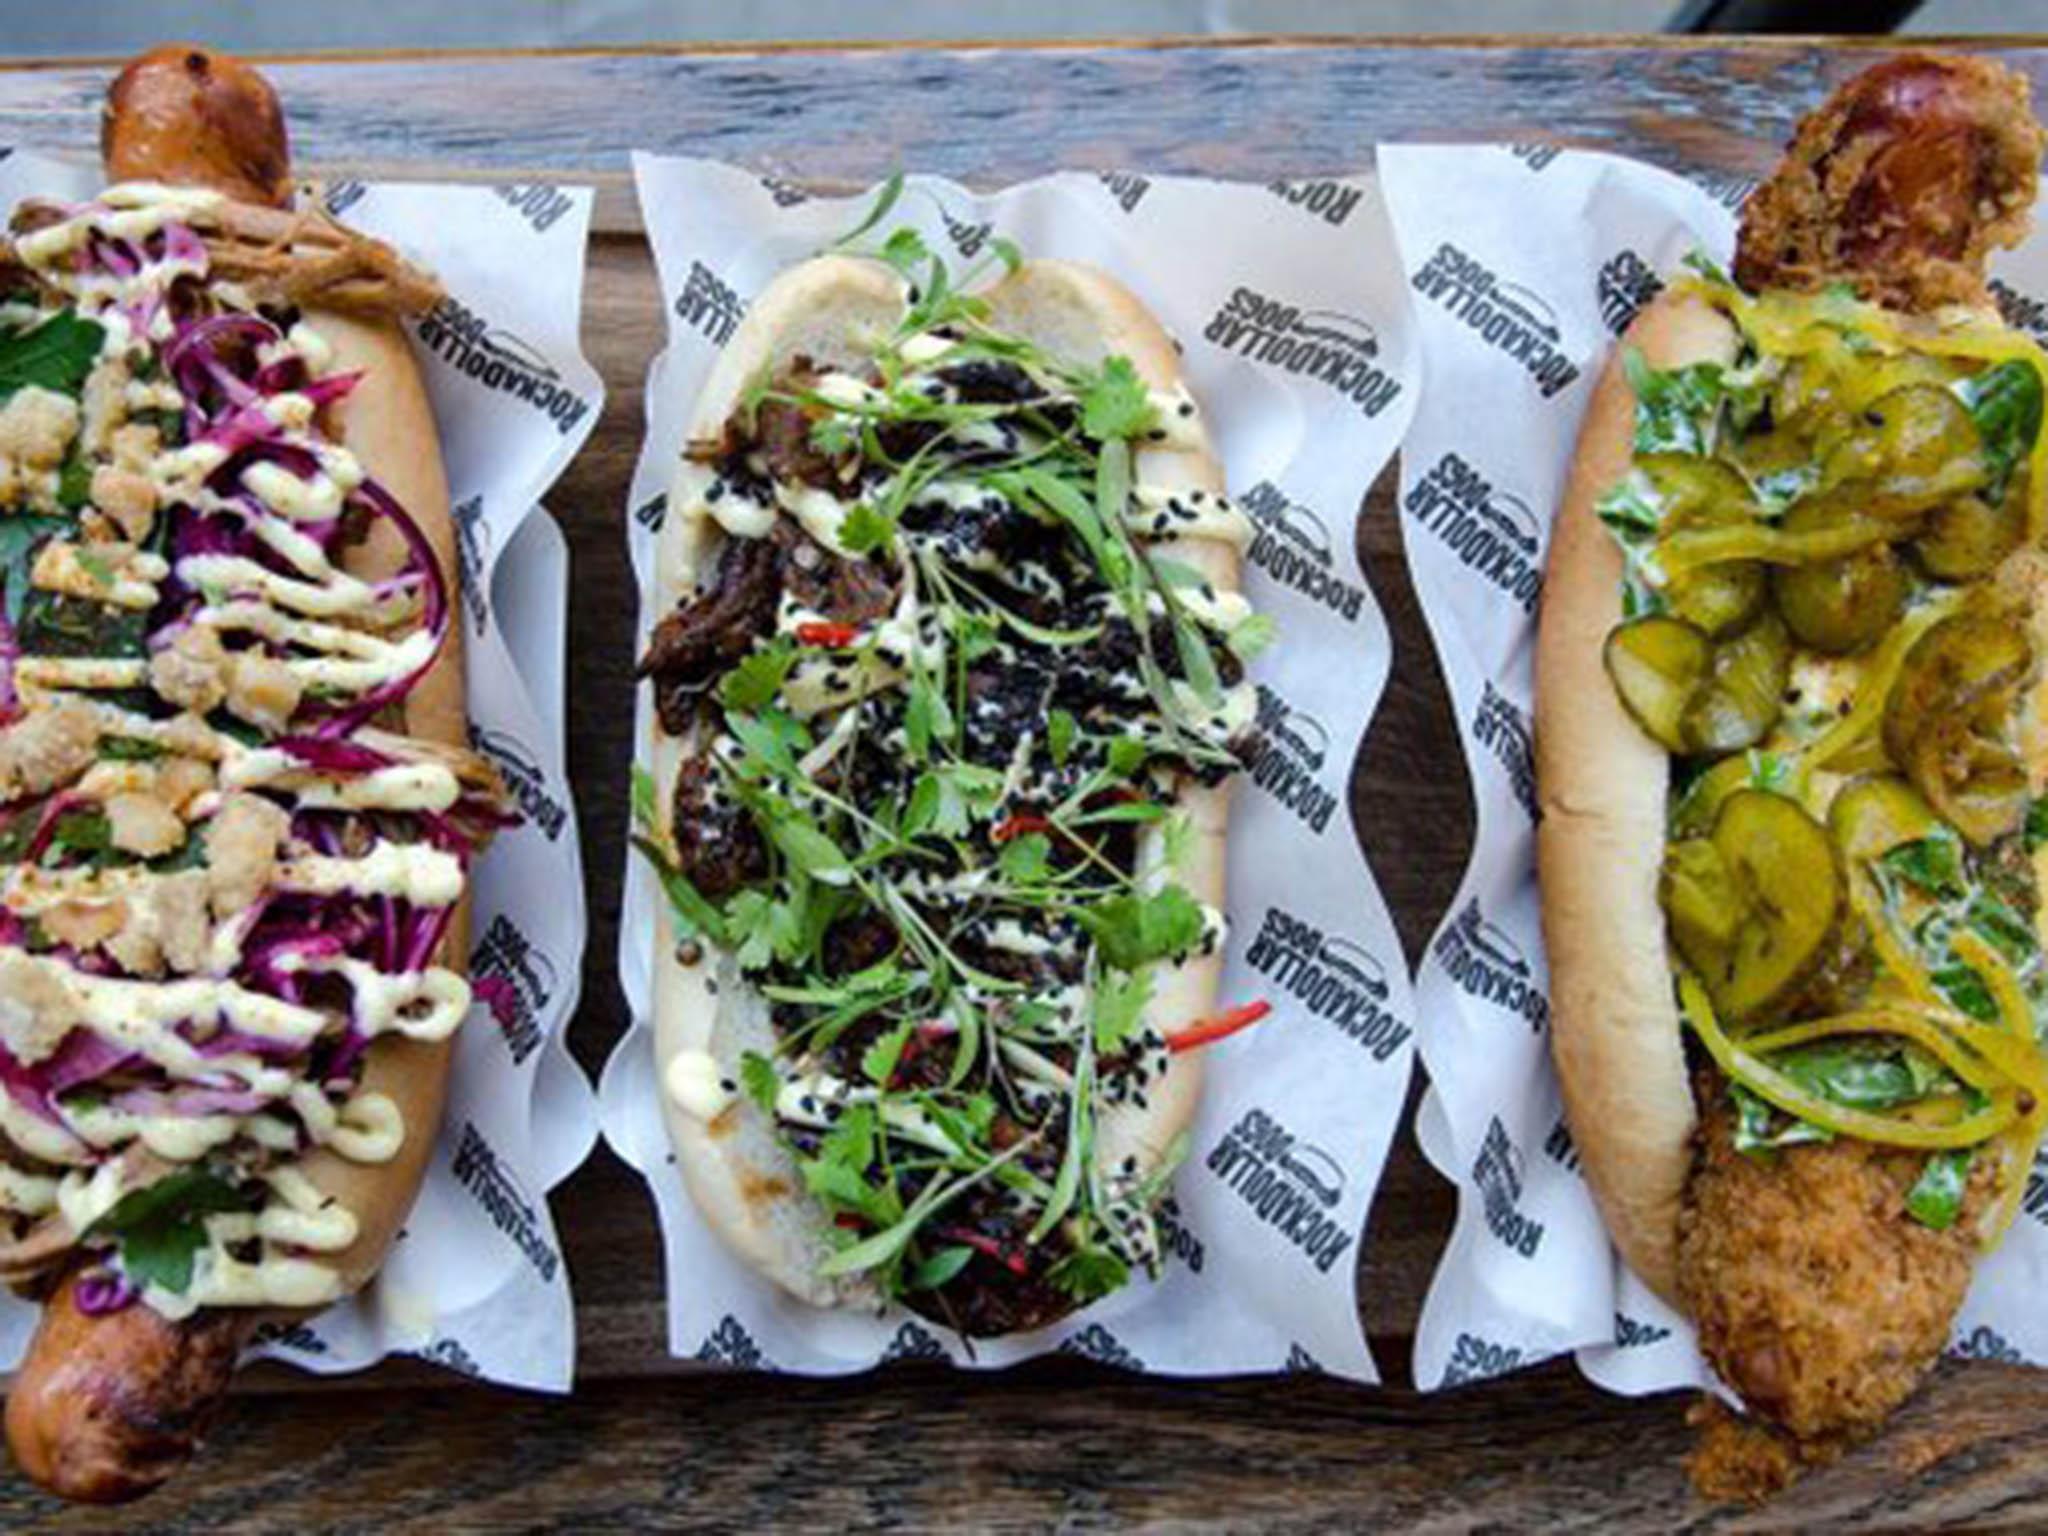 From left to right is the pork papillon, the magnificent seven and the cheese bullitt hot dogs